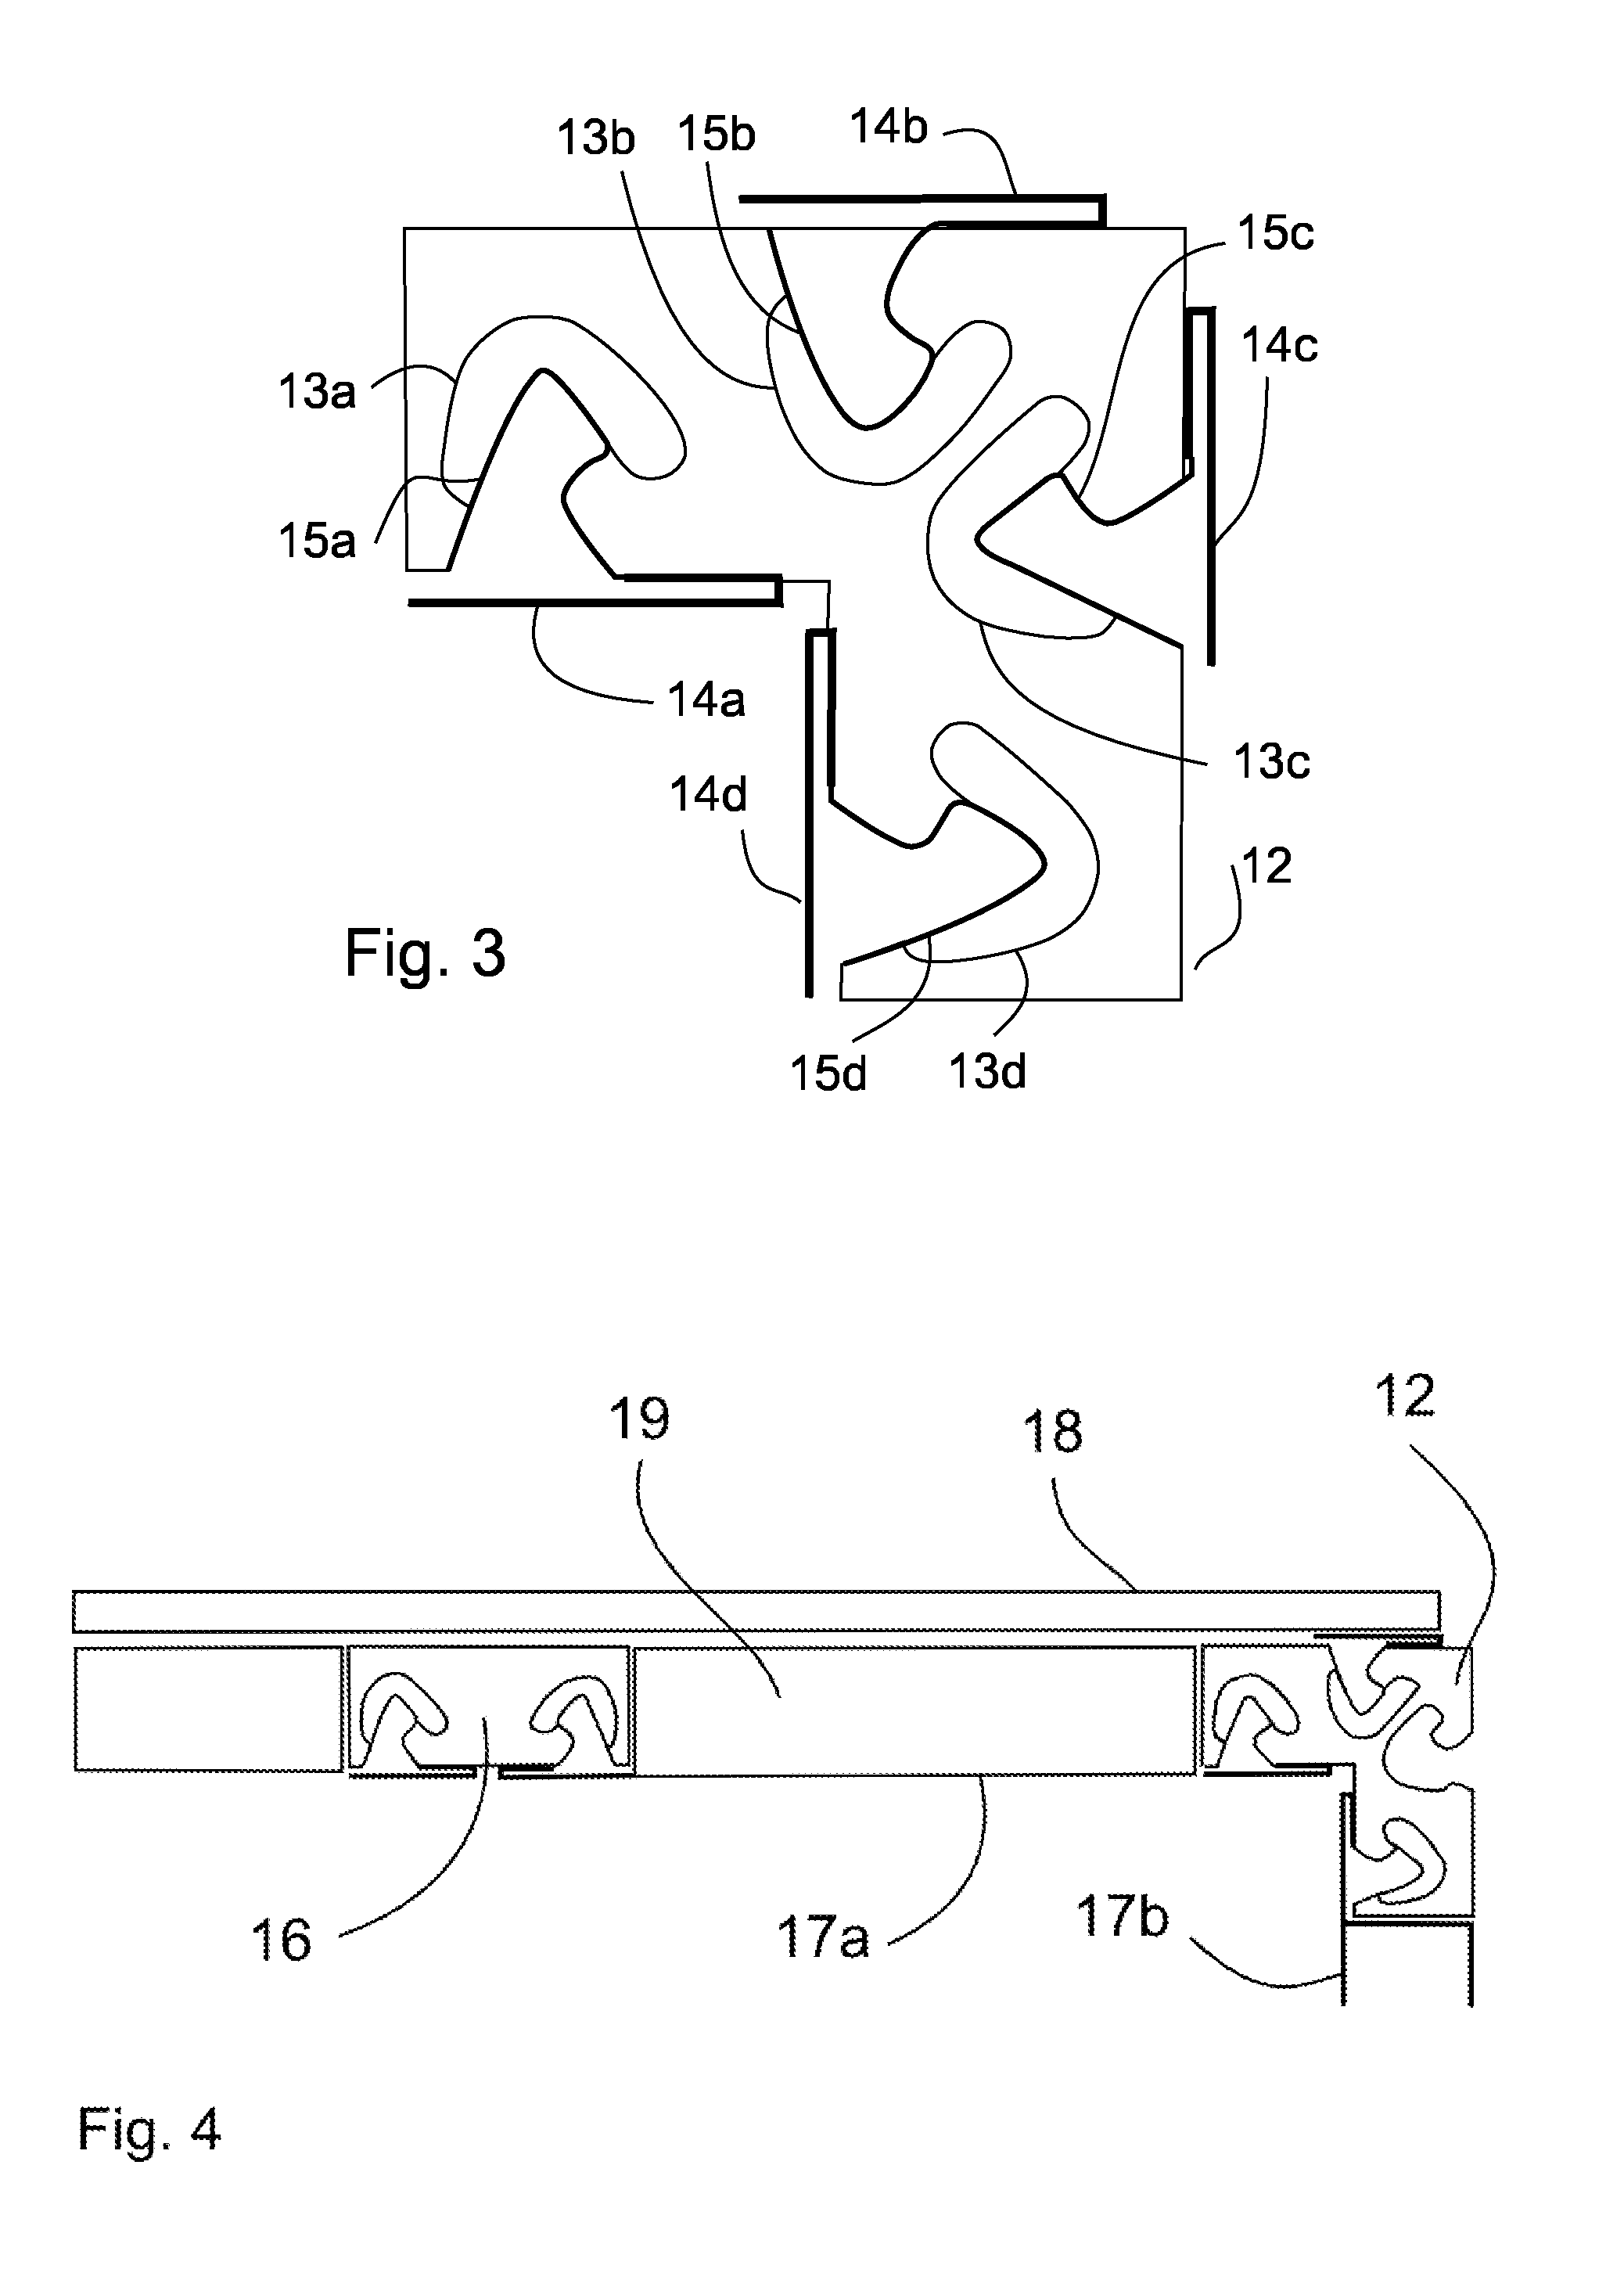 Arrangement for attaching panels to support structures, a construction support structure and fastening means, and their use in modular building elements